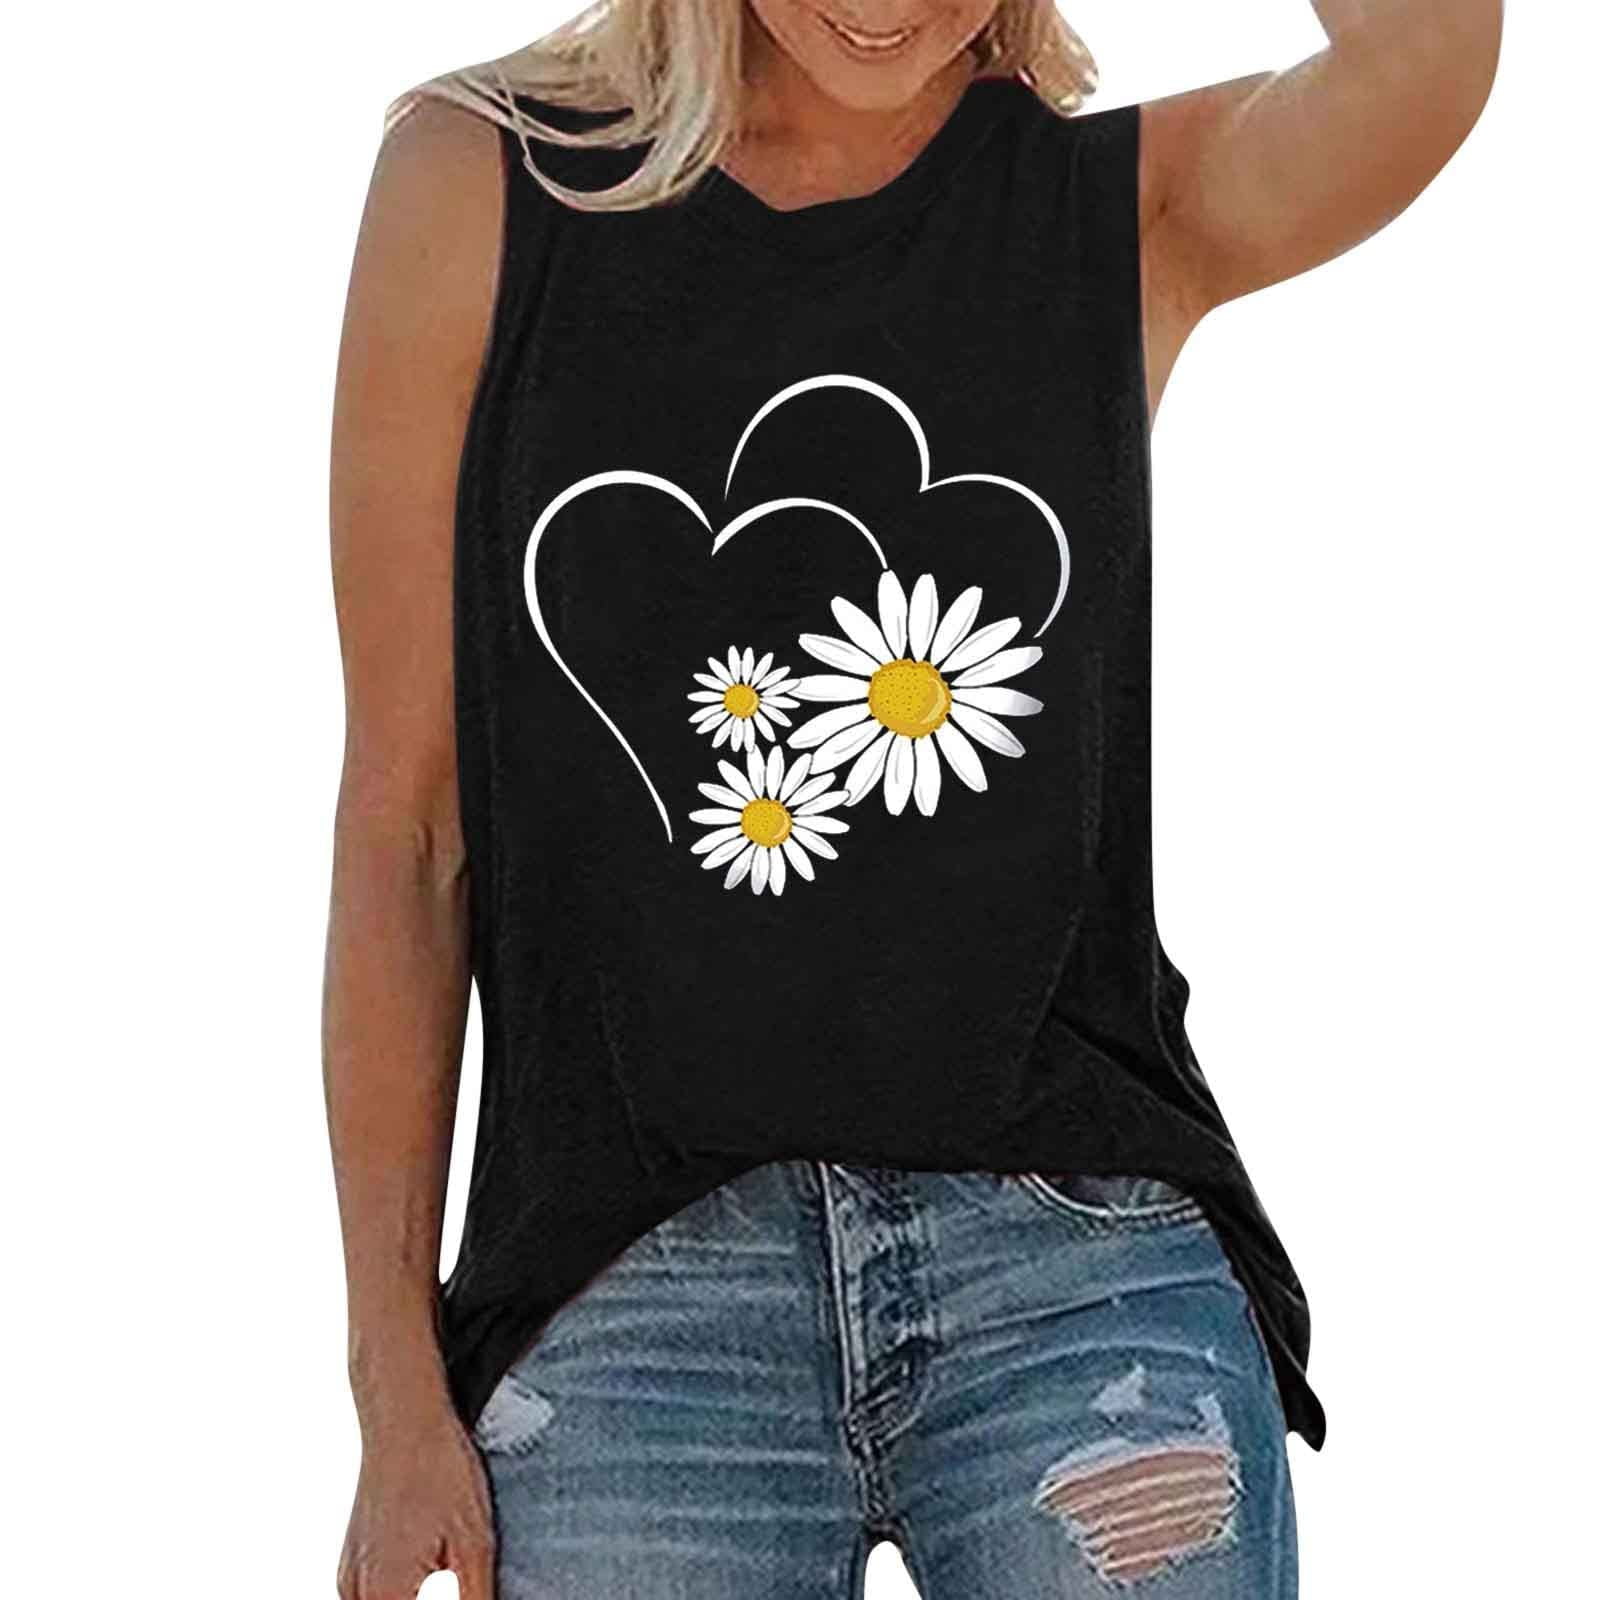 In A World Full Of Roses Be A Sunflower Tank Top-Sunflower Tank Top-Muscle Tank-Gardening Tank-Boho Tank-Summer Tank-Spring Tank-Plant Lover